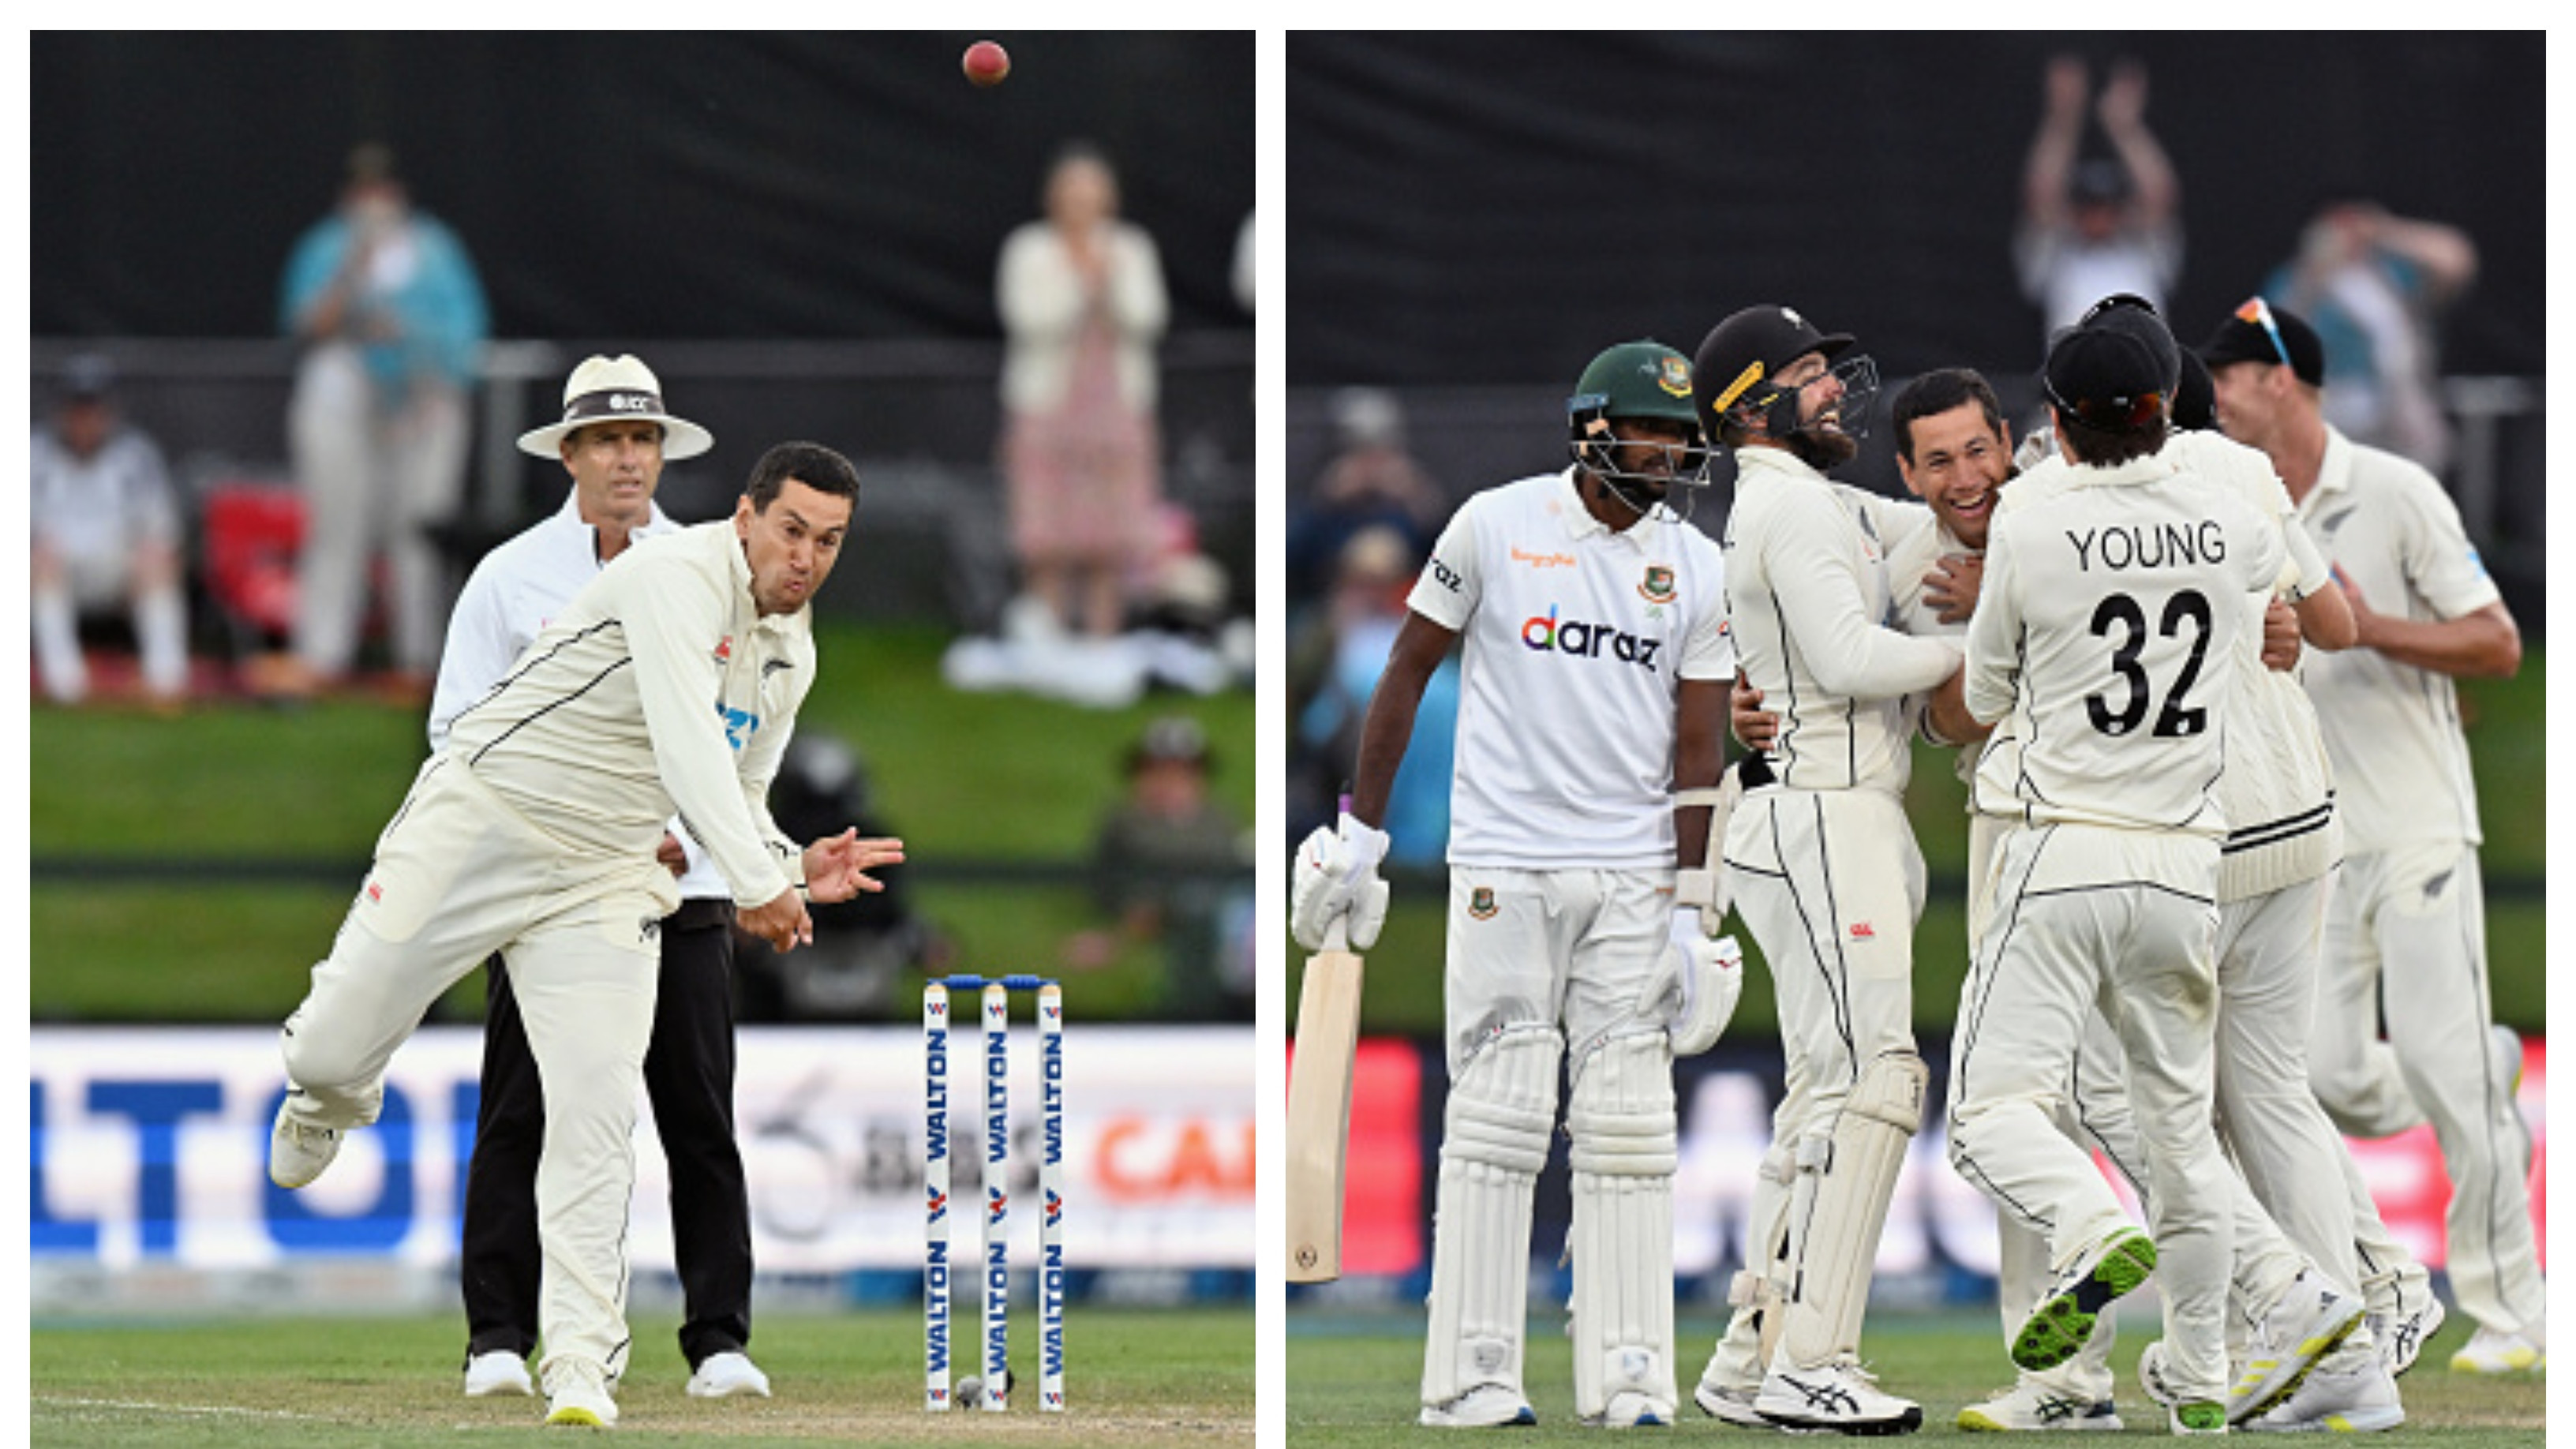 NZ v BAN 2022: WATCH – Ross Taylor bids adieu to Test cricket with a wicket in Kiwis’ huge win in 2nd Test